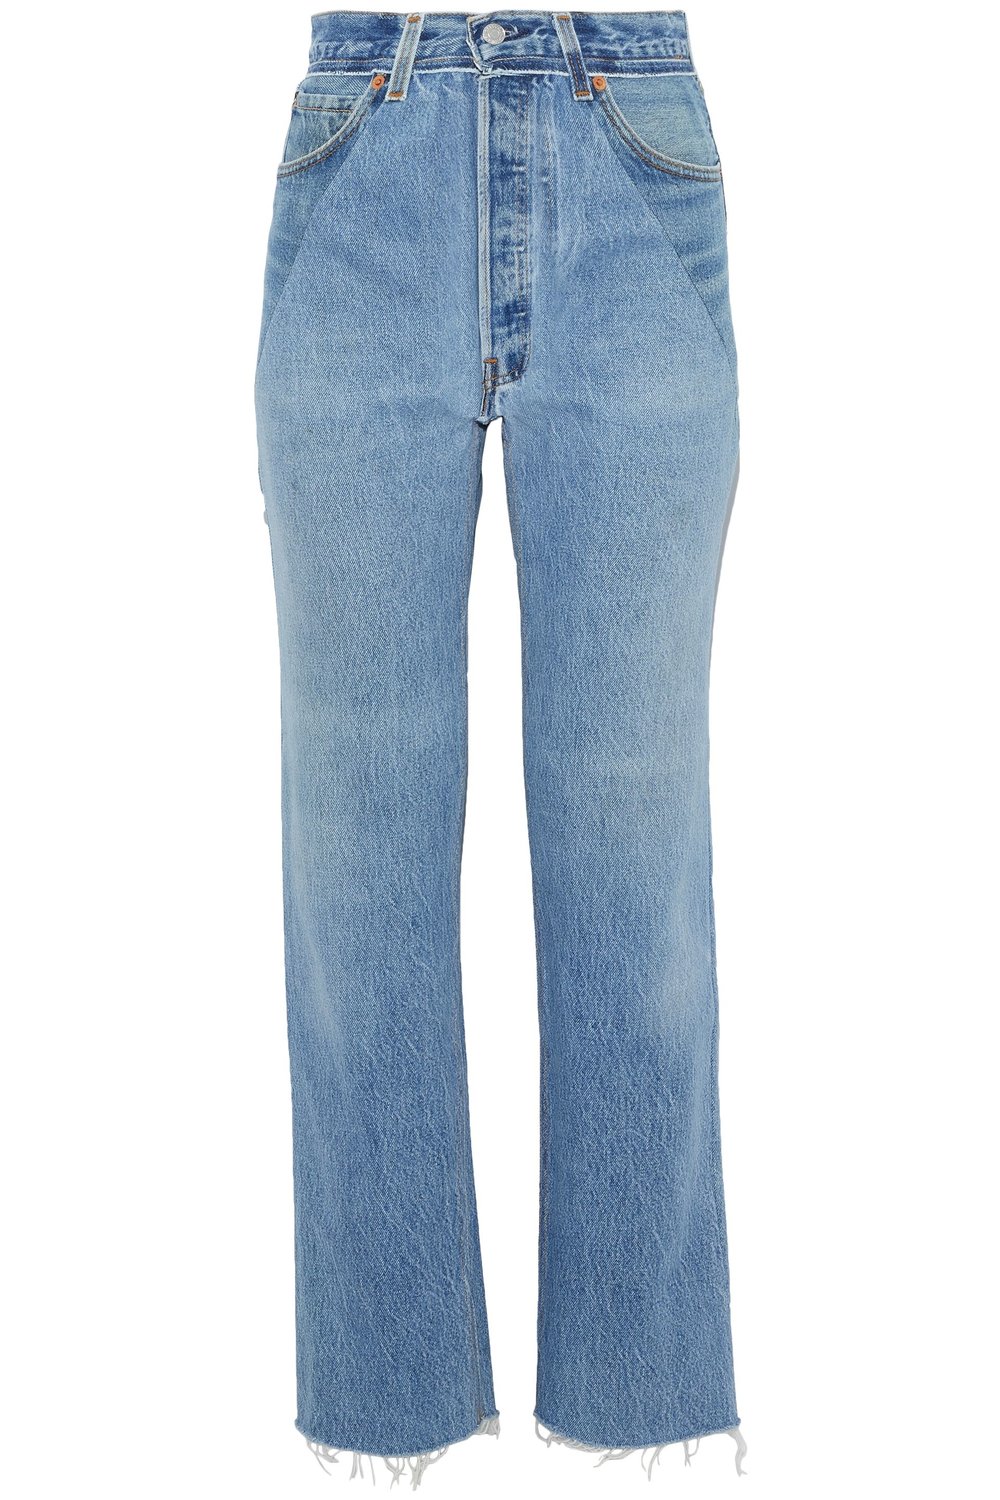 RE/DONE by Levi's Paneled Distressed High-Rise Straight-Leg Jeans